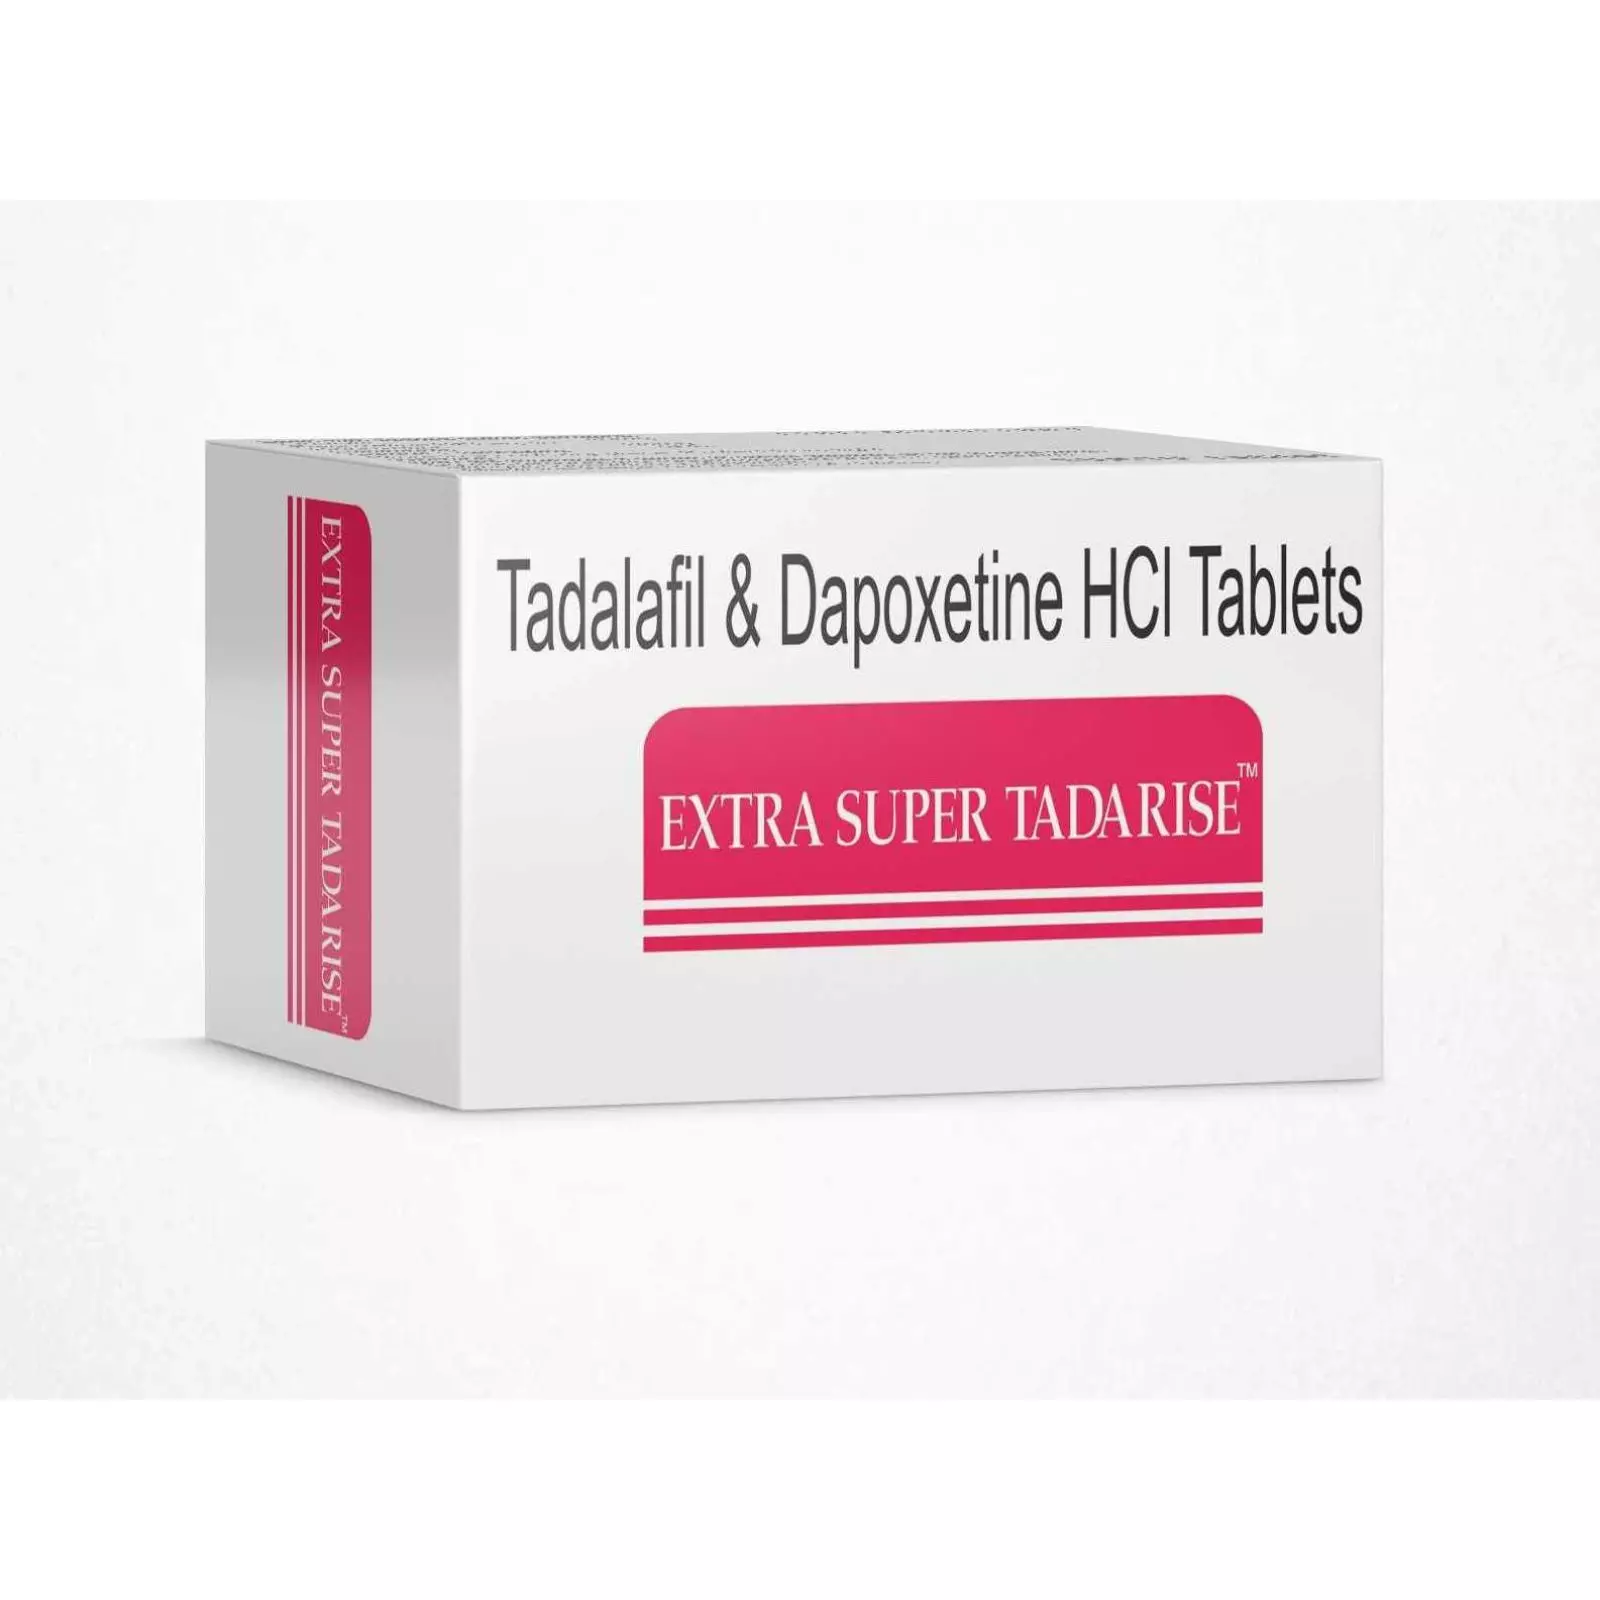 Powerful combination tablet of Tadalafil 40mg &amp; Dapoxetine 60mg to treat both Erectile Dysfunction and Premature Ejaculation.